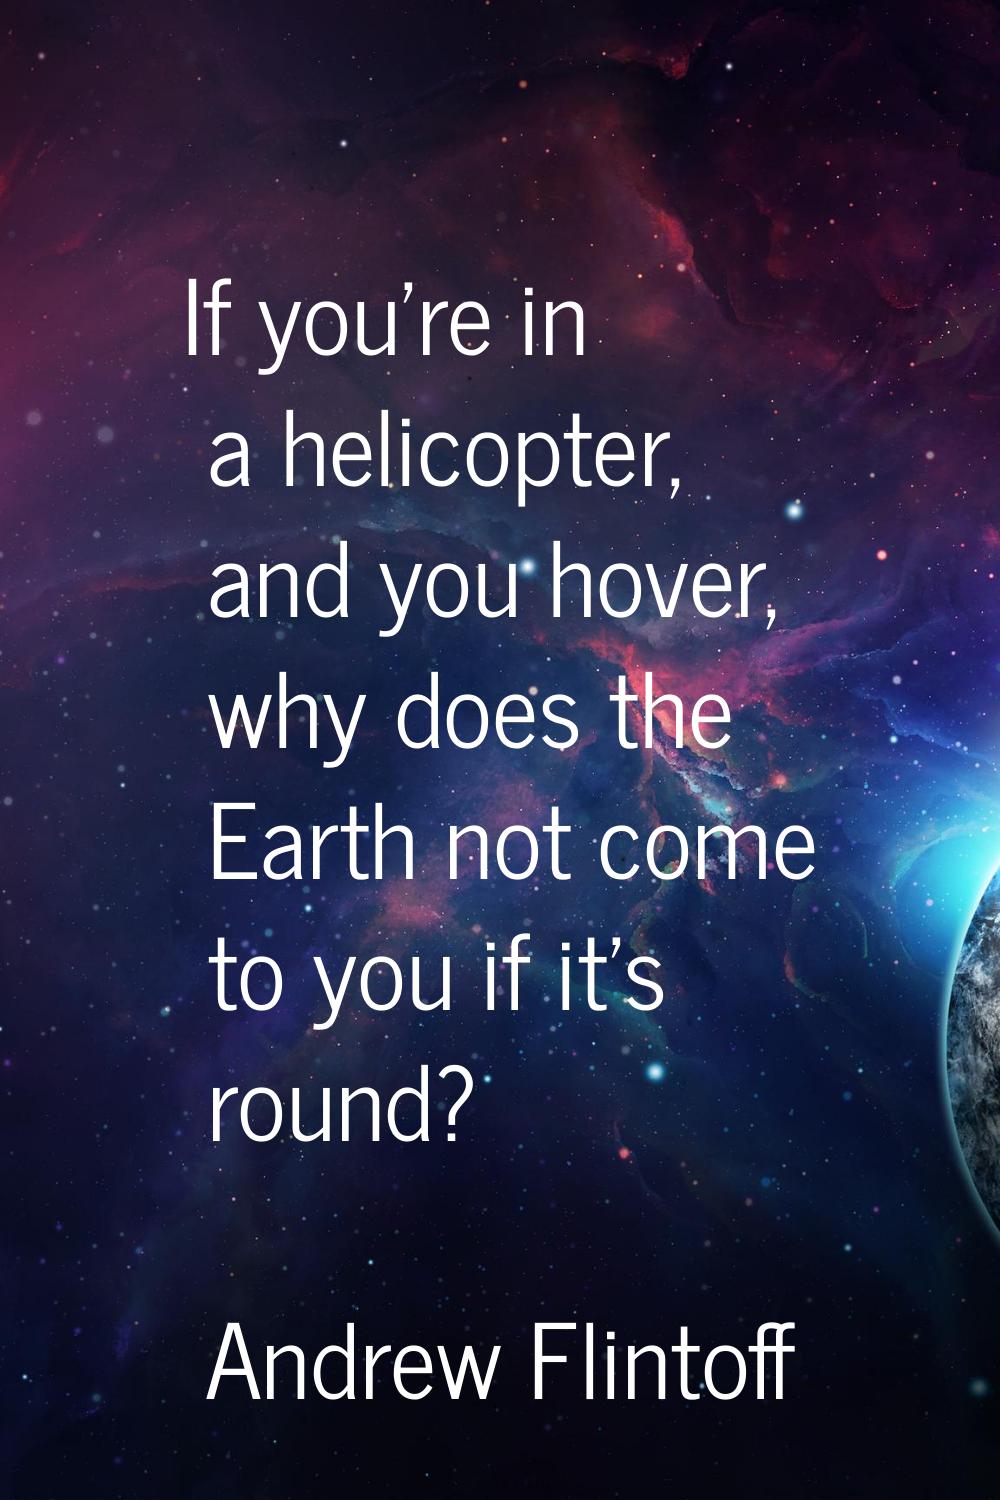 If you're in a helicopter, and you hover, why does the Earth not come to you if it's round?